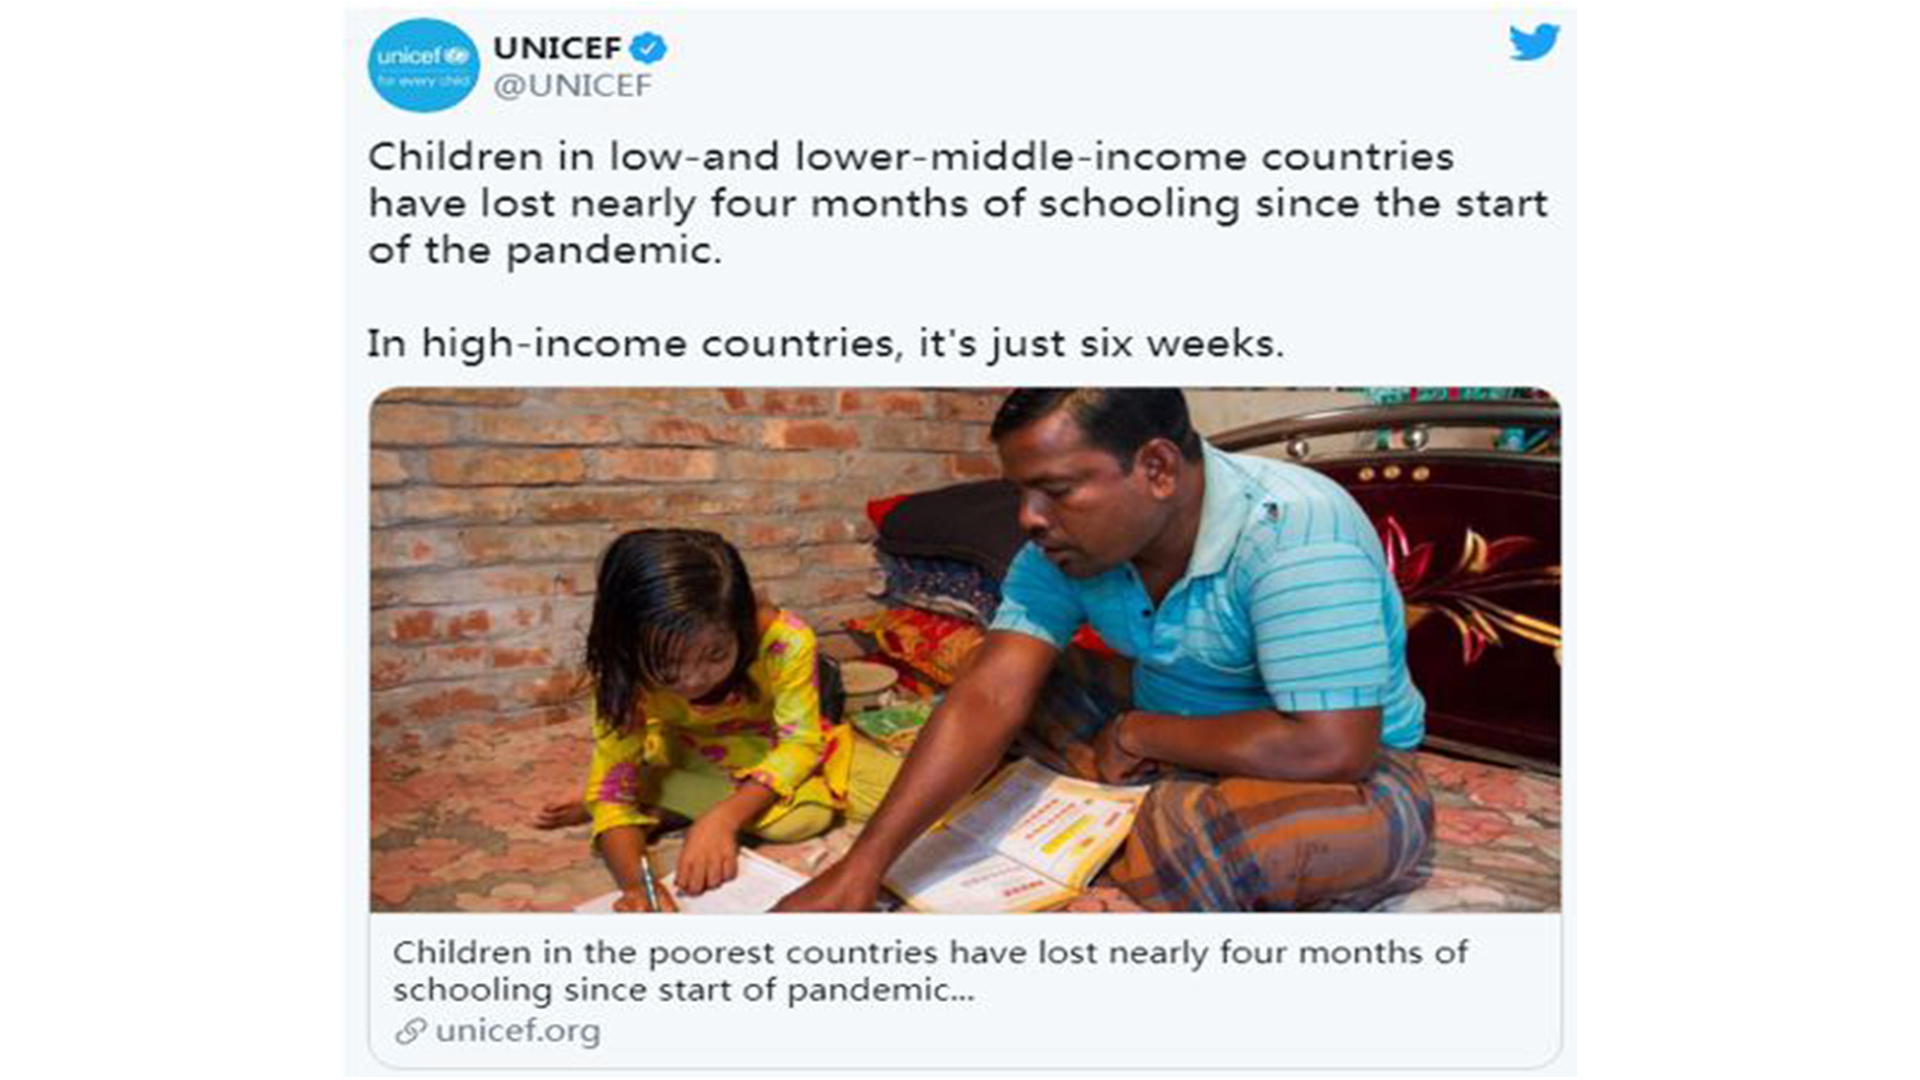 Poorest children away from school for 4 months - United Nations Report